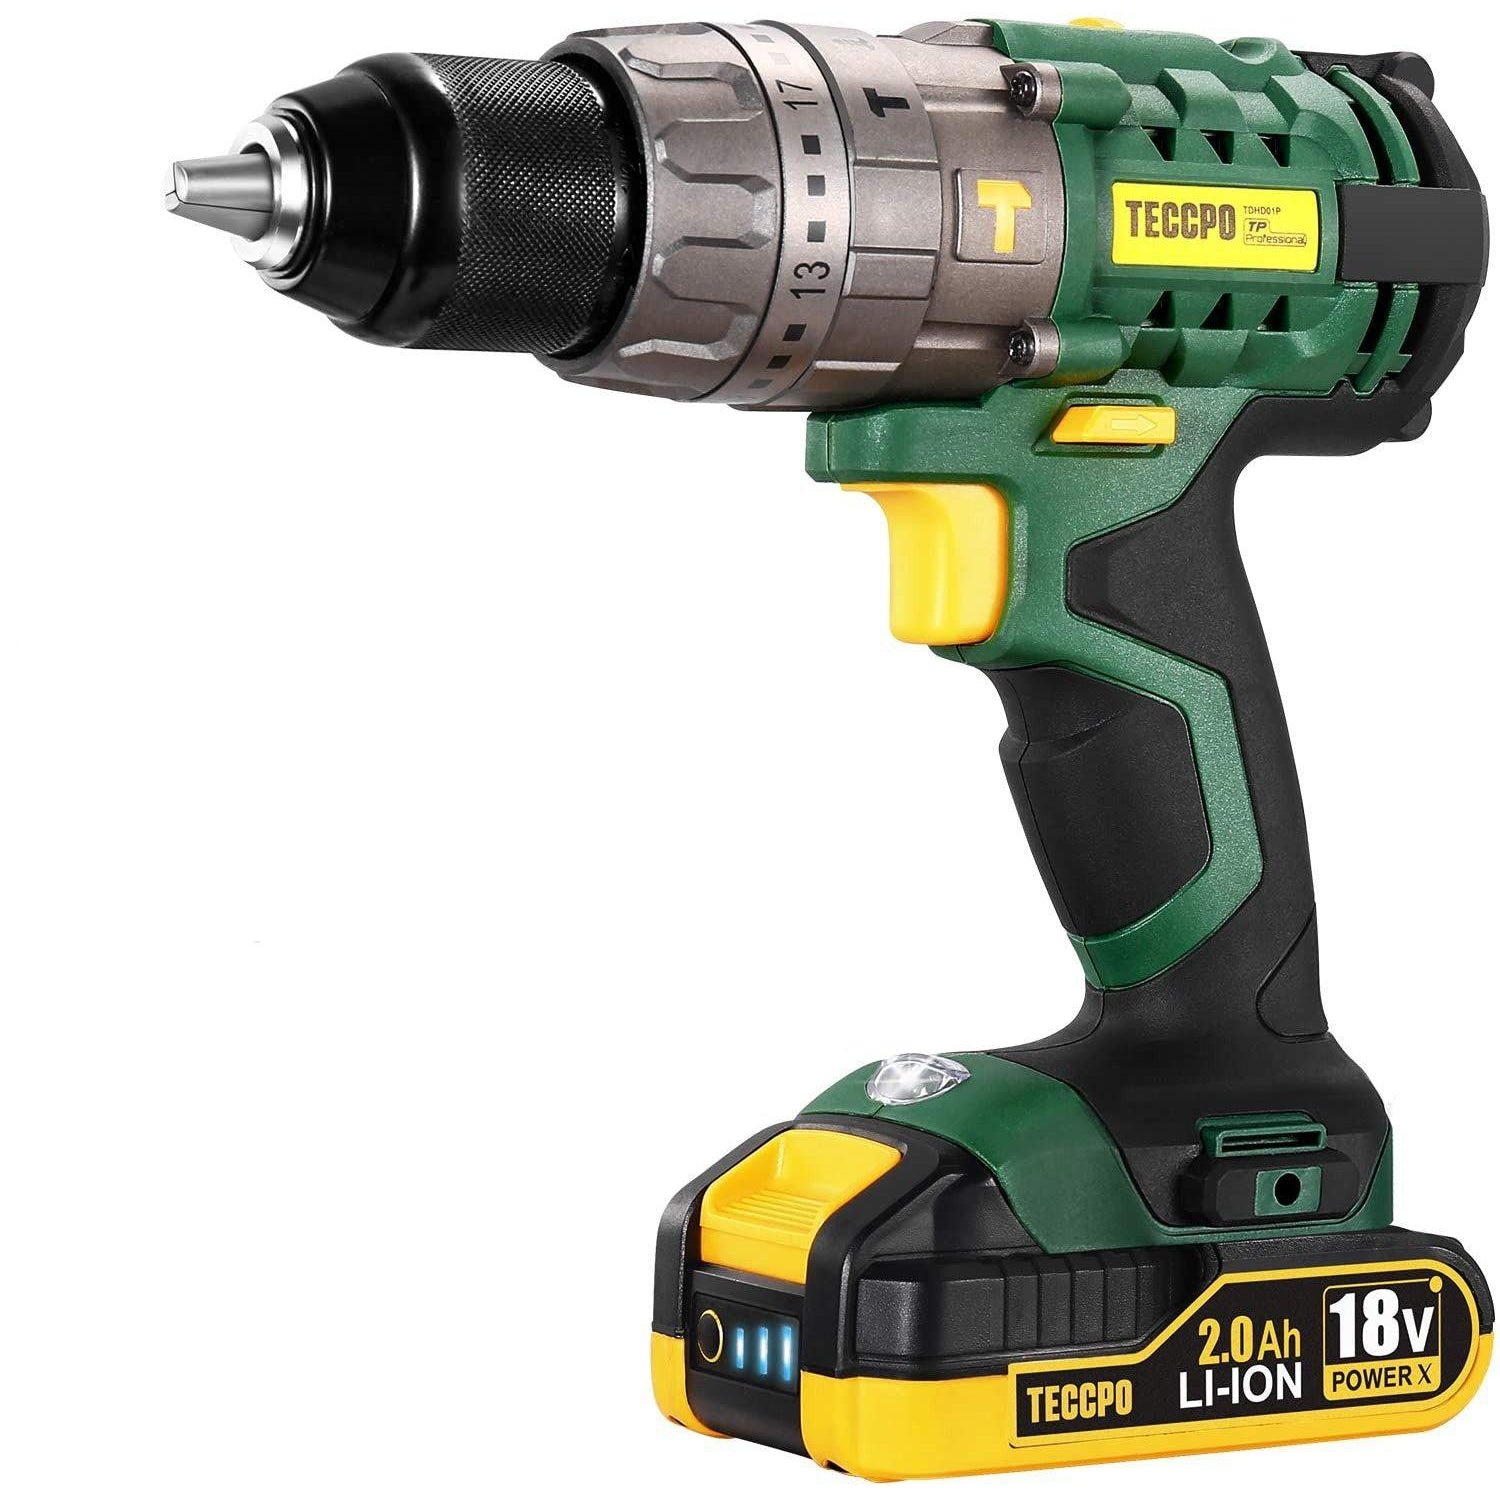 Teccpo Cordless Brushless Drill 60 Nm, 18 V, 13 mm Chuck, 30 Minute Fast Charger, Variable Speed